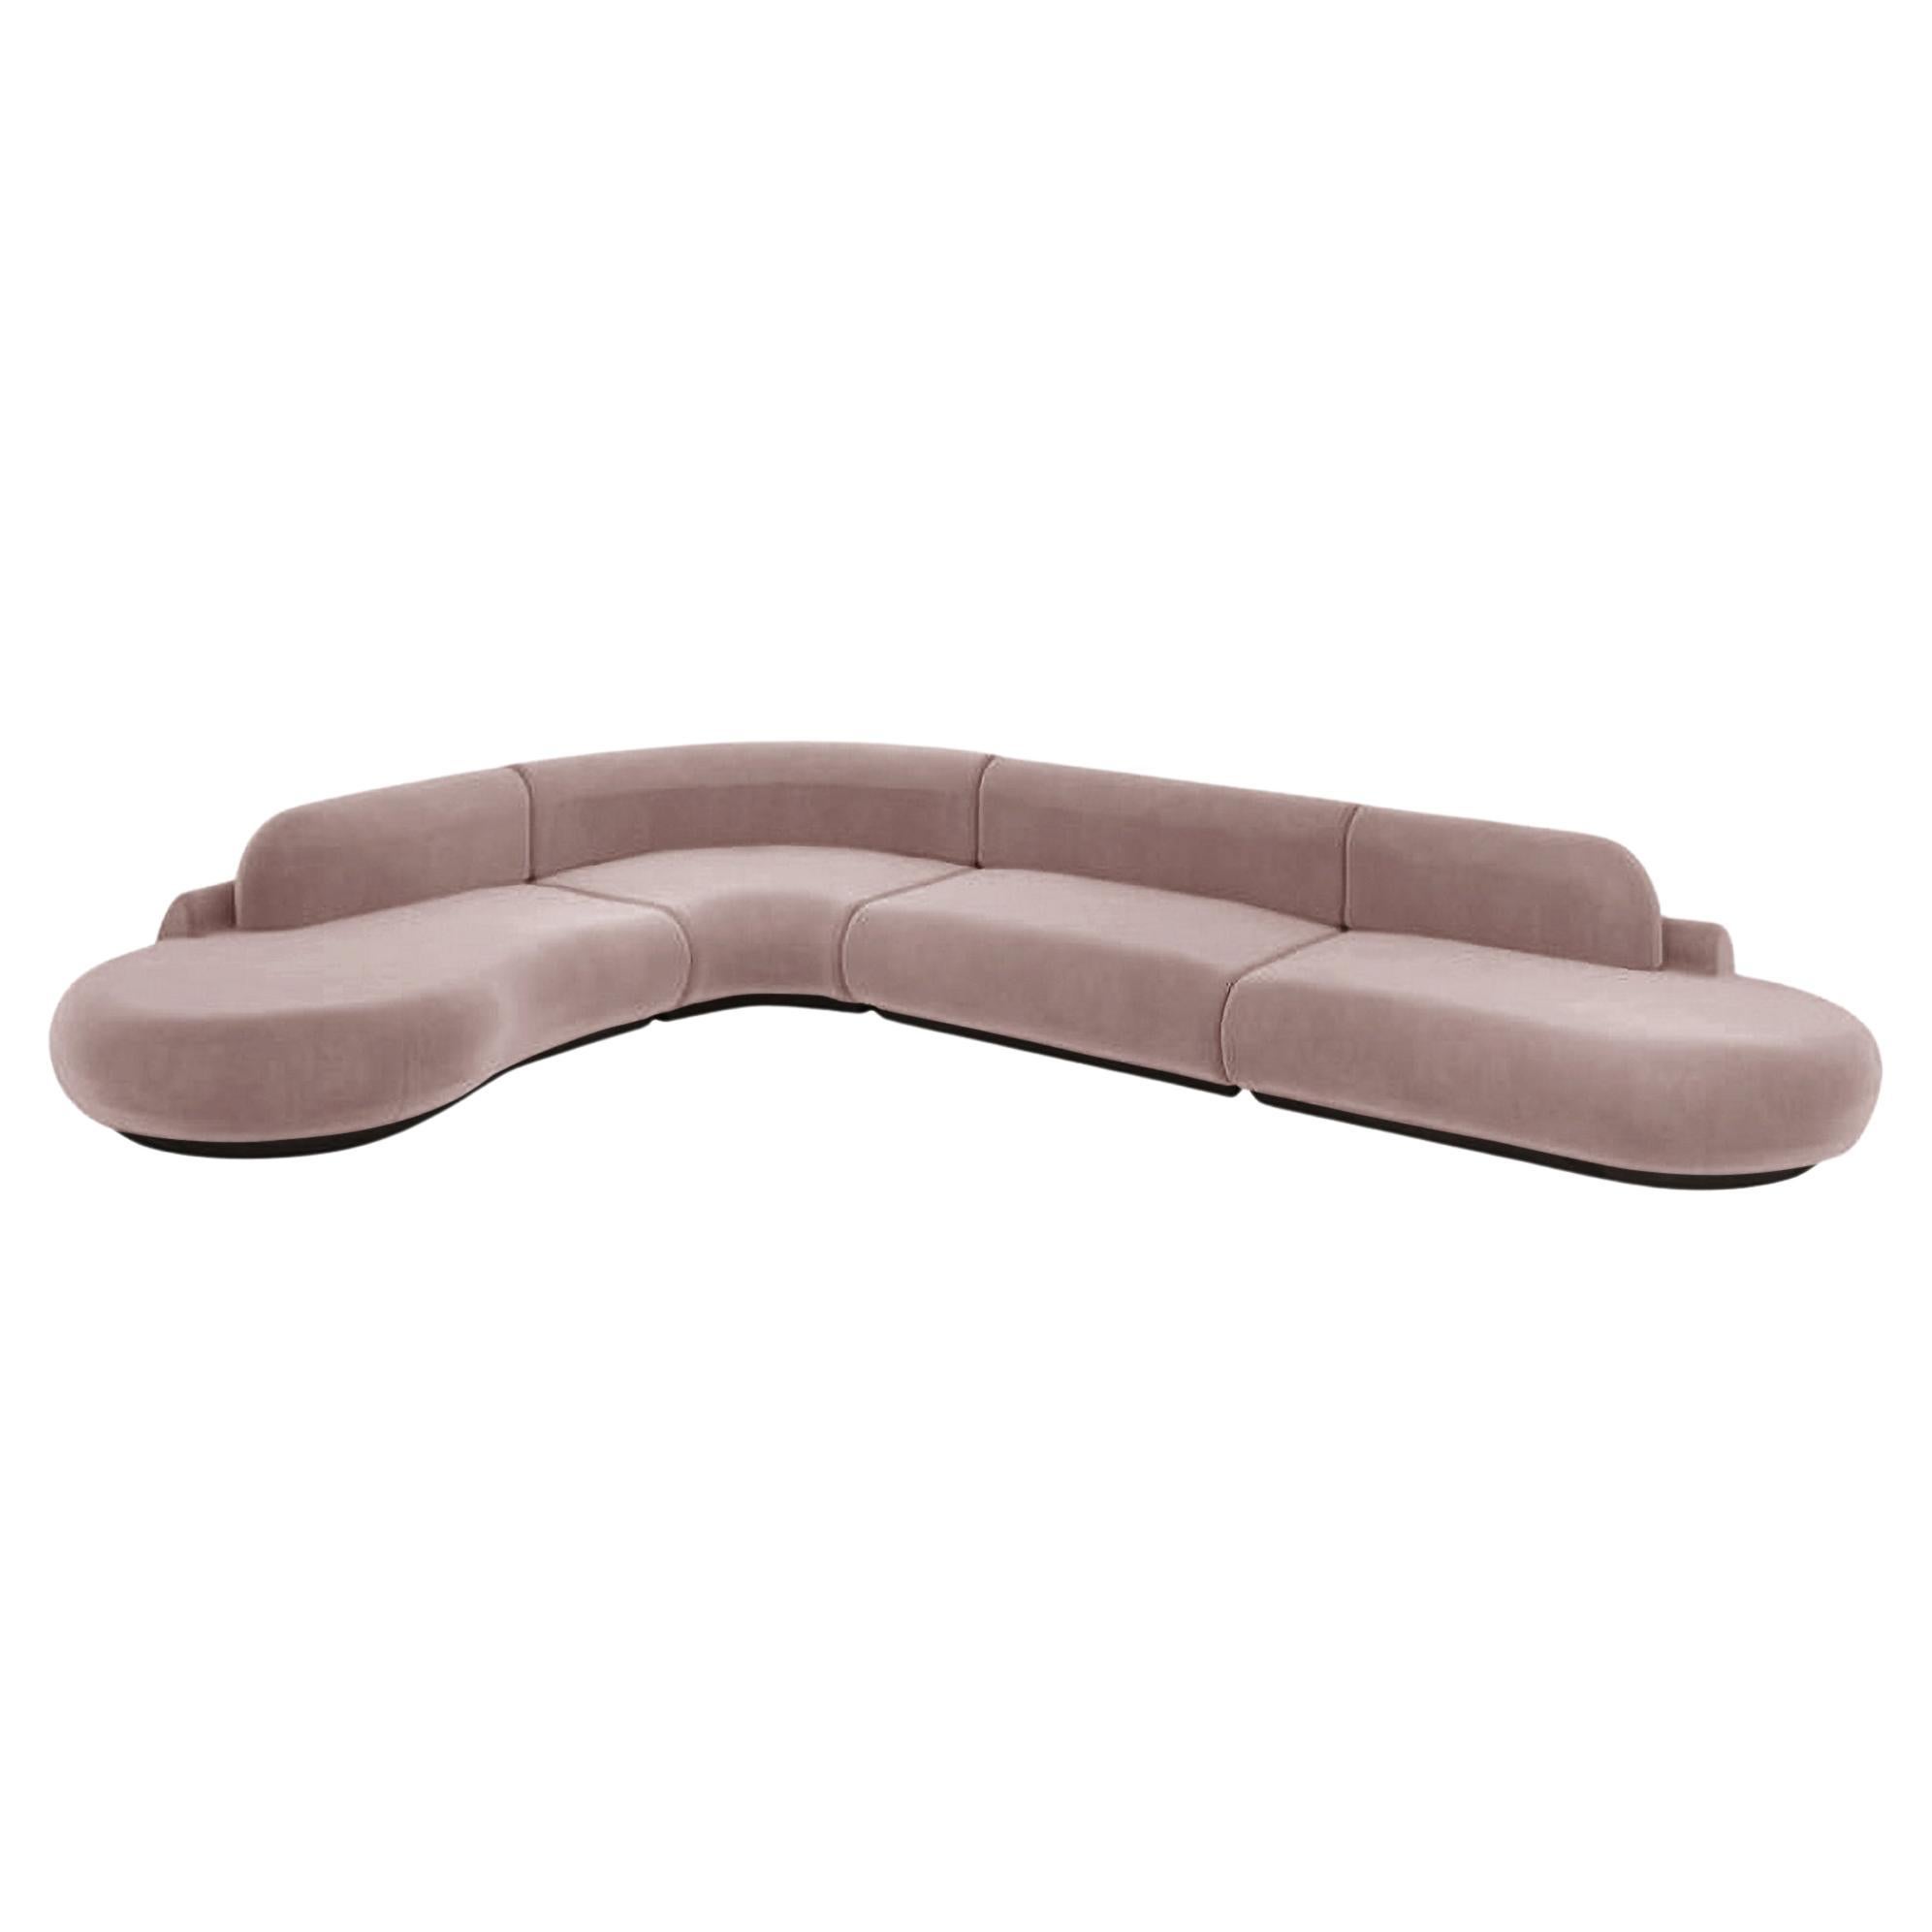 Naked Curved Sectional Sofa, 4 Piece with Beech Ash-056-5 and Barcelona Lotus